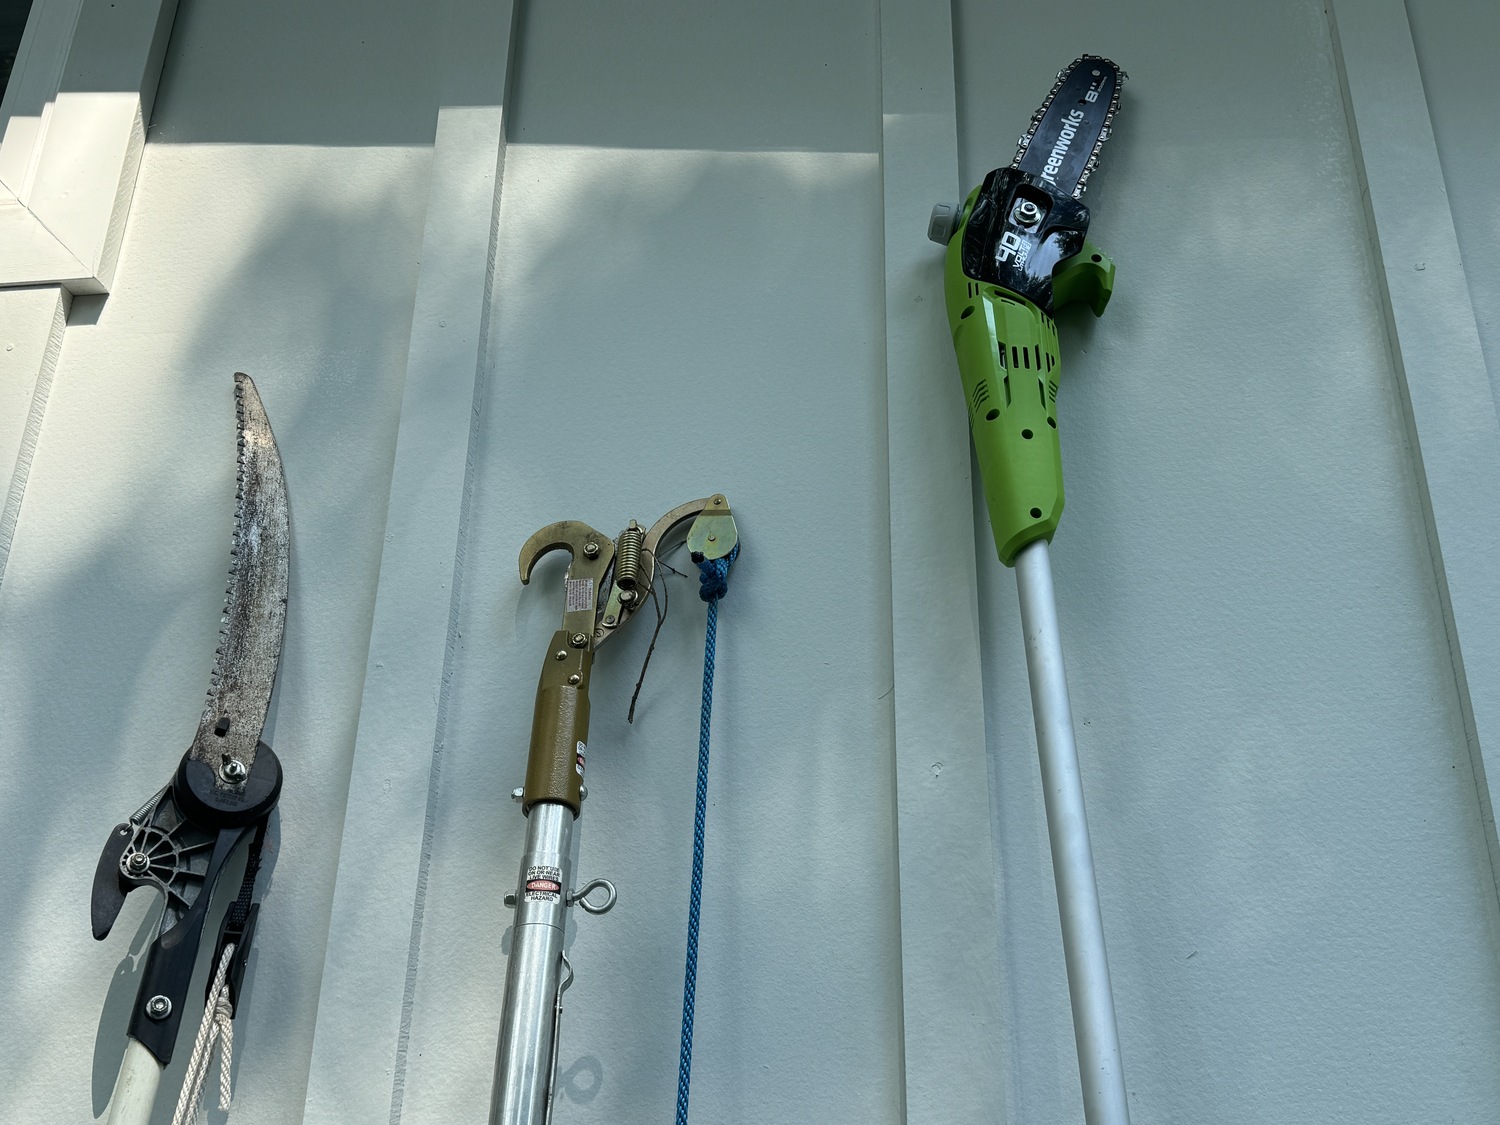 The working ends of the three tools. The loppers
and manual saws get more difficult to work with as you extend them. The Greenworks battery pole saw requires little effort even when fully extended and makes smooth, straight cuts. Read the manual and keep it oiled. ANDREW MESSINGER